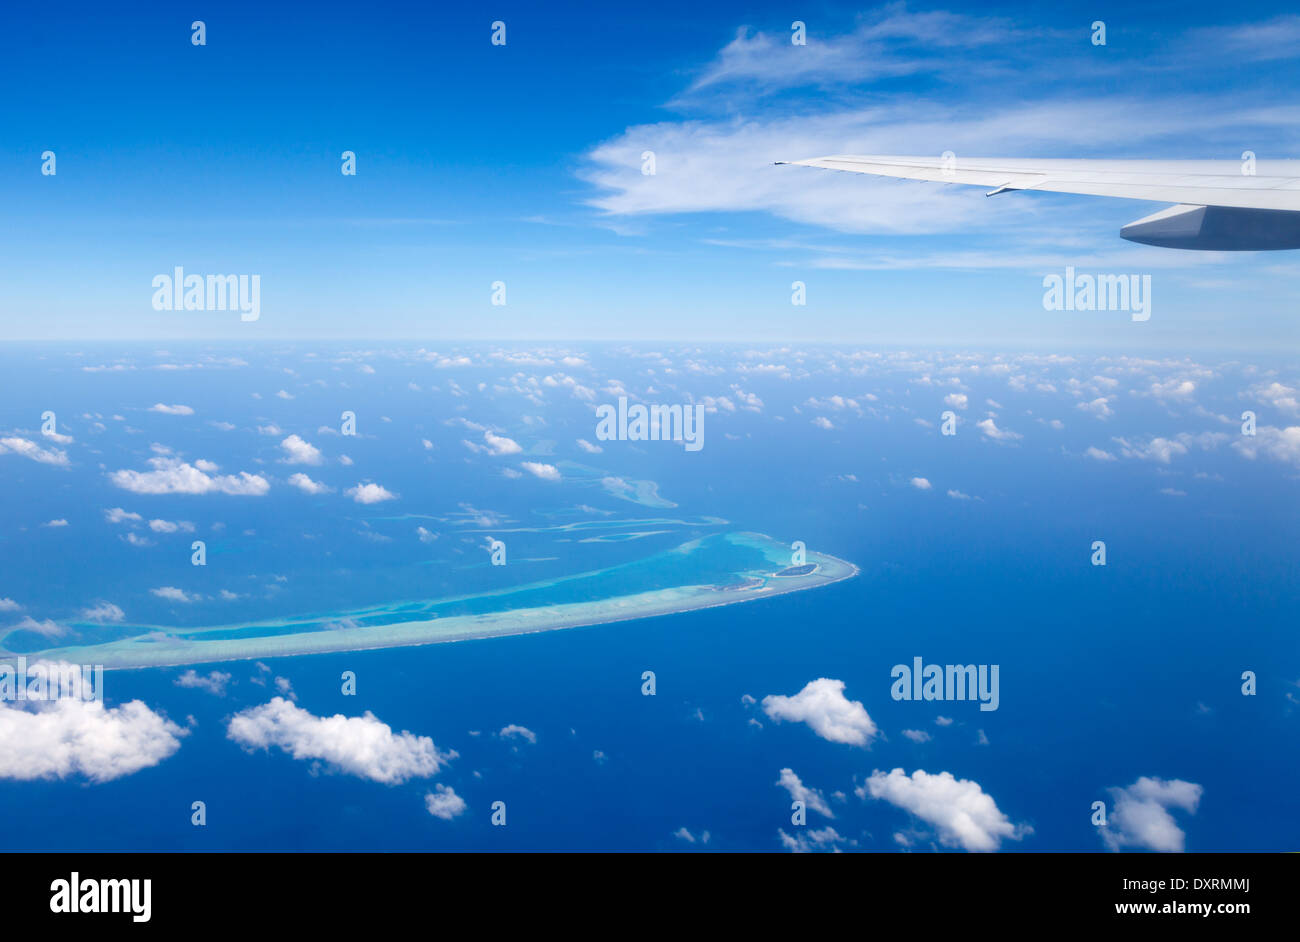 View from the window of an airplane flying above the Maldive Islands in the Indian Ocean 3 Stock Photo